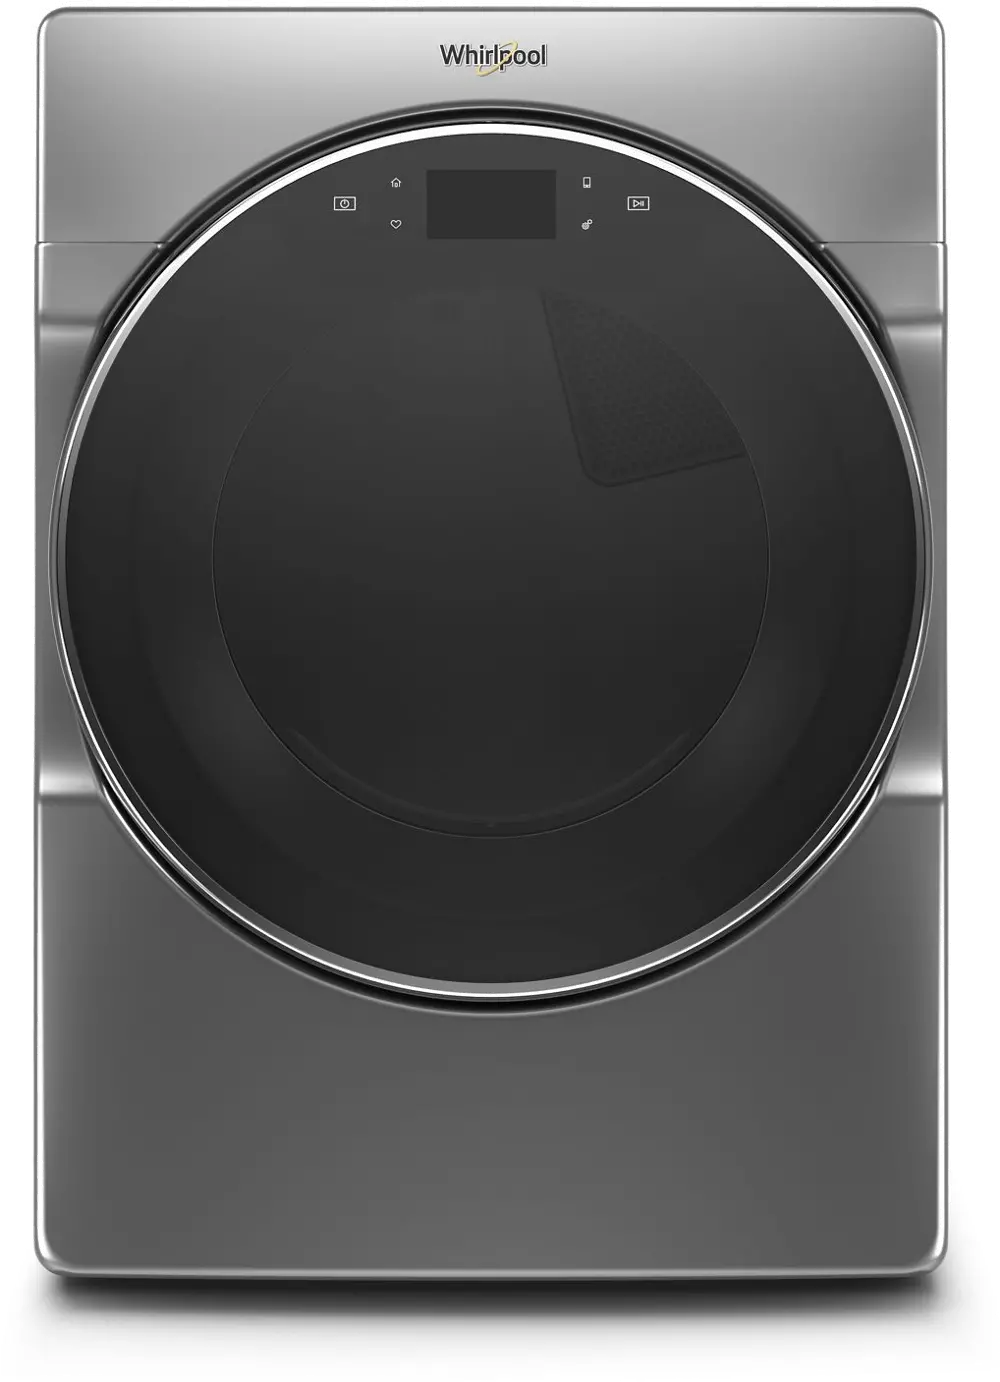 WED9620HC Whirlpool 7.4 cu. ft. Smart Front Load Electric Dryer - Chrome-1